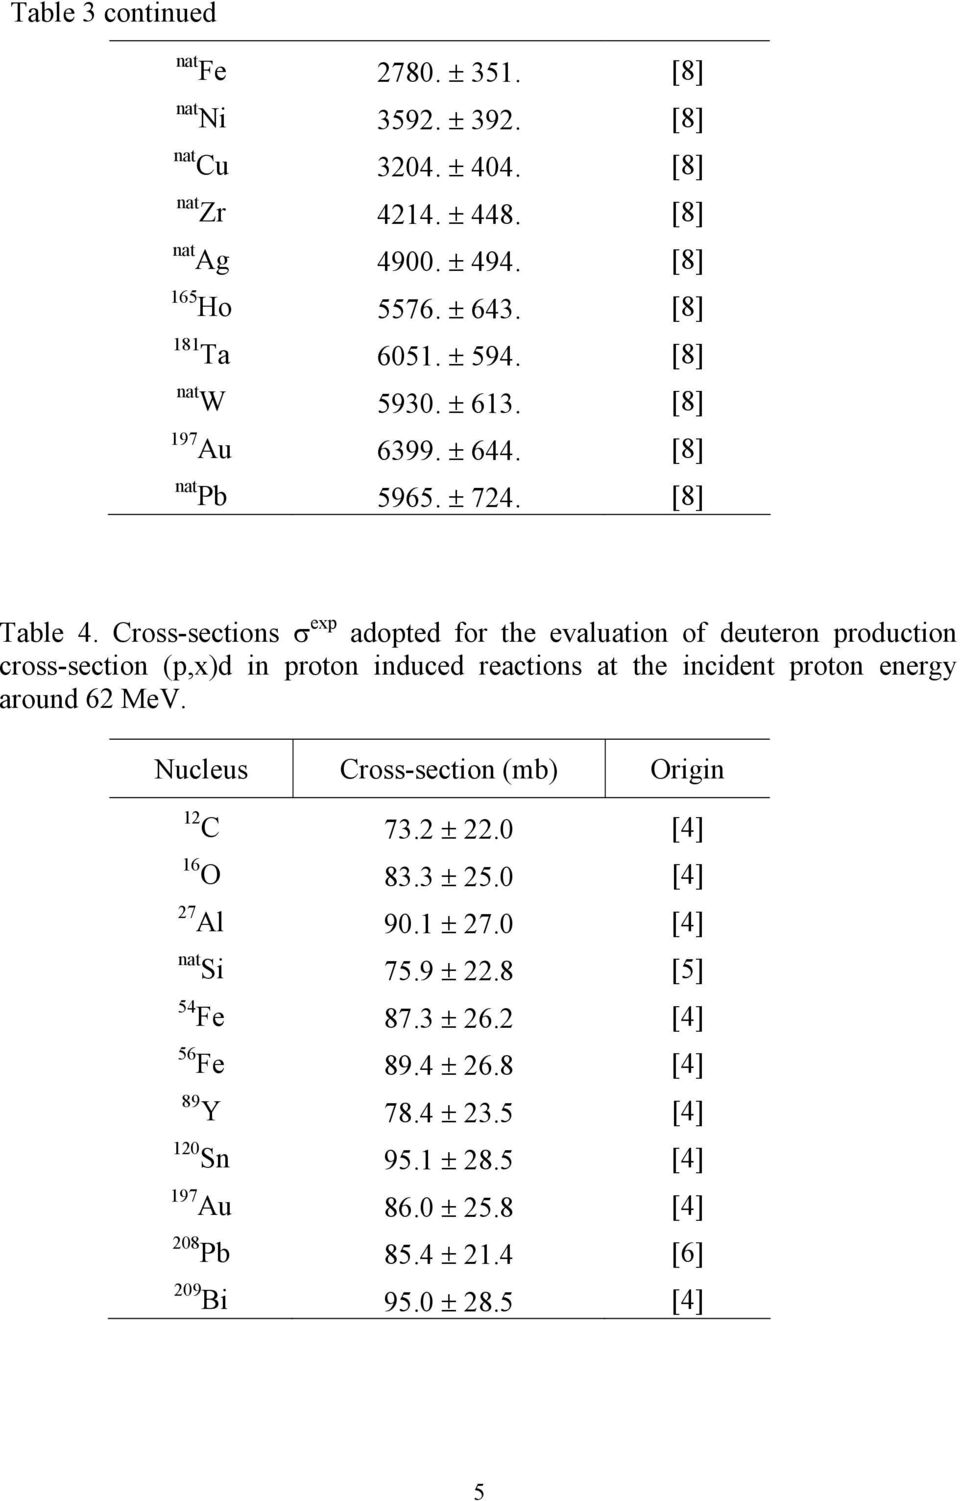 Cross-sections exp adopted for the evaluation of deuteron production cross-section (p,x)d in proton induced reactions at the incident proton energy around 62 MeV.